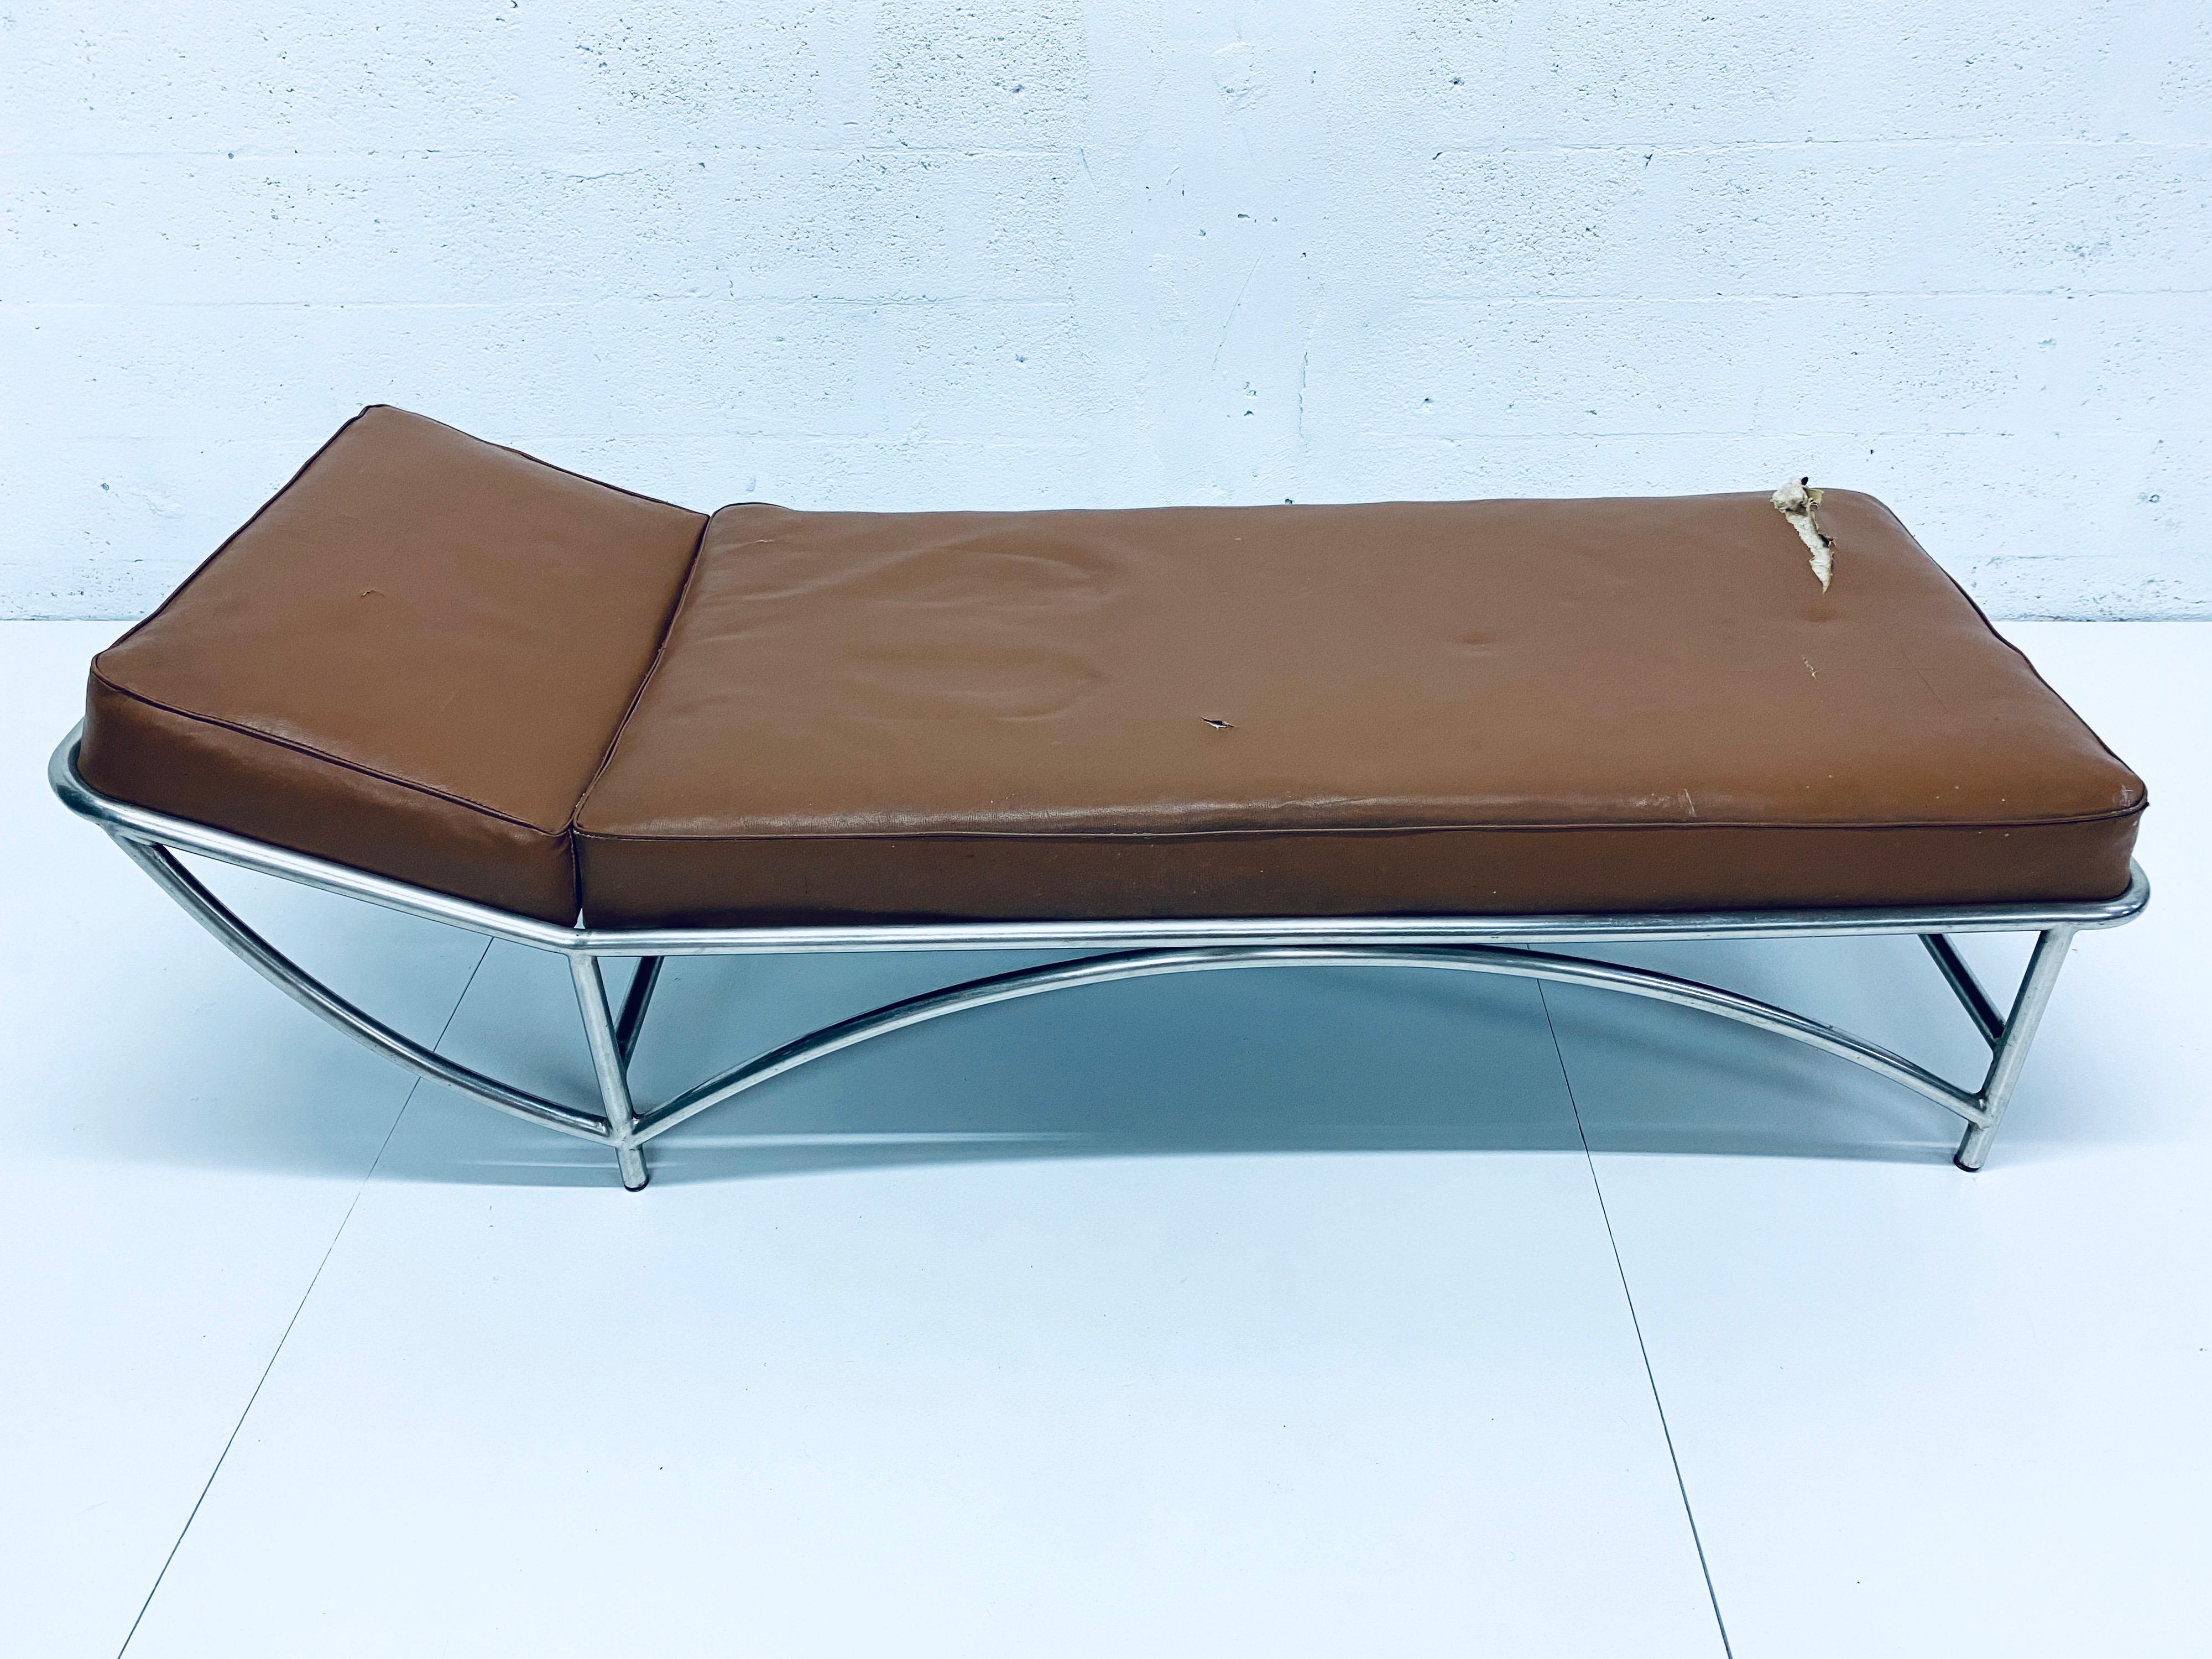 Mid-20th Century Heywood Wakefield Art Deco Revival Tubular Steel Chaise Lounge, Daybed